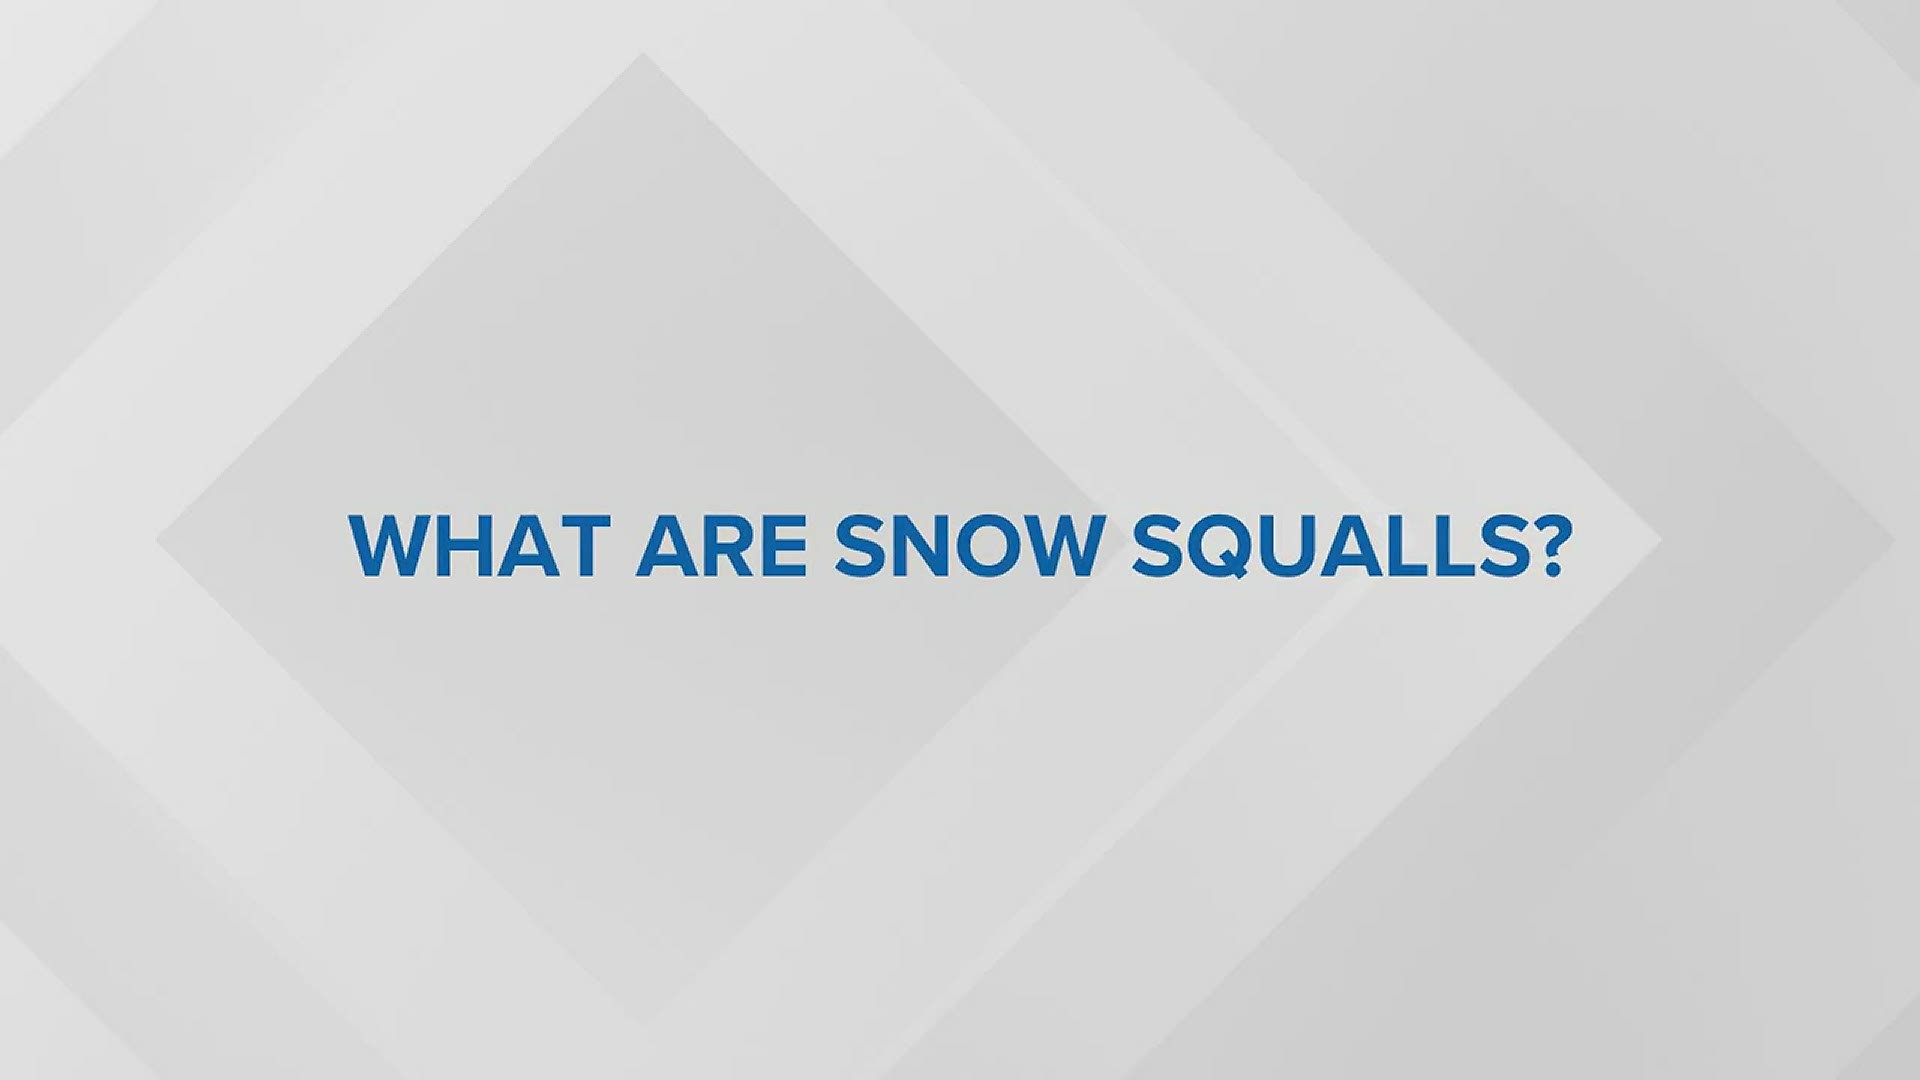 Here's why it's sometimes difficult for radar to pick up snow squalls in our area